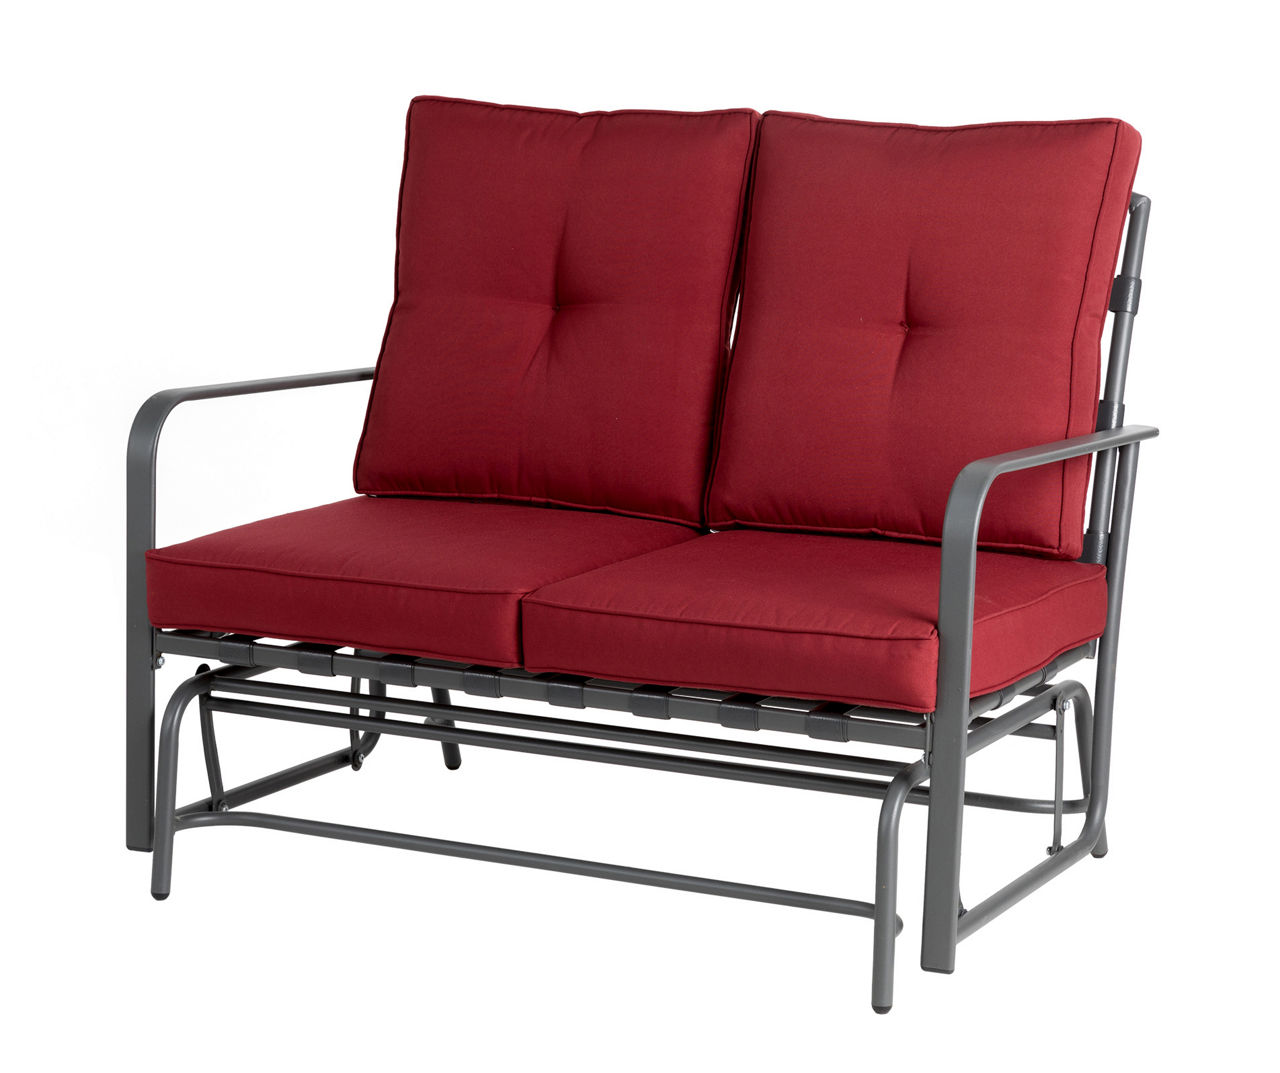 Red Gliding Cushioned Patio Loveseat